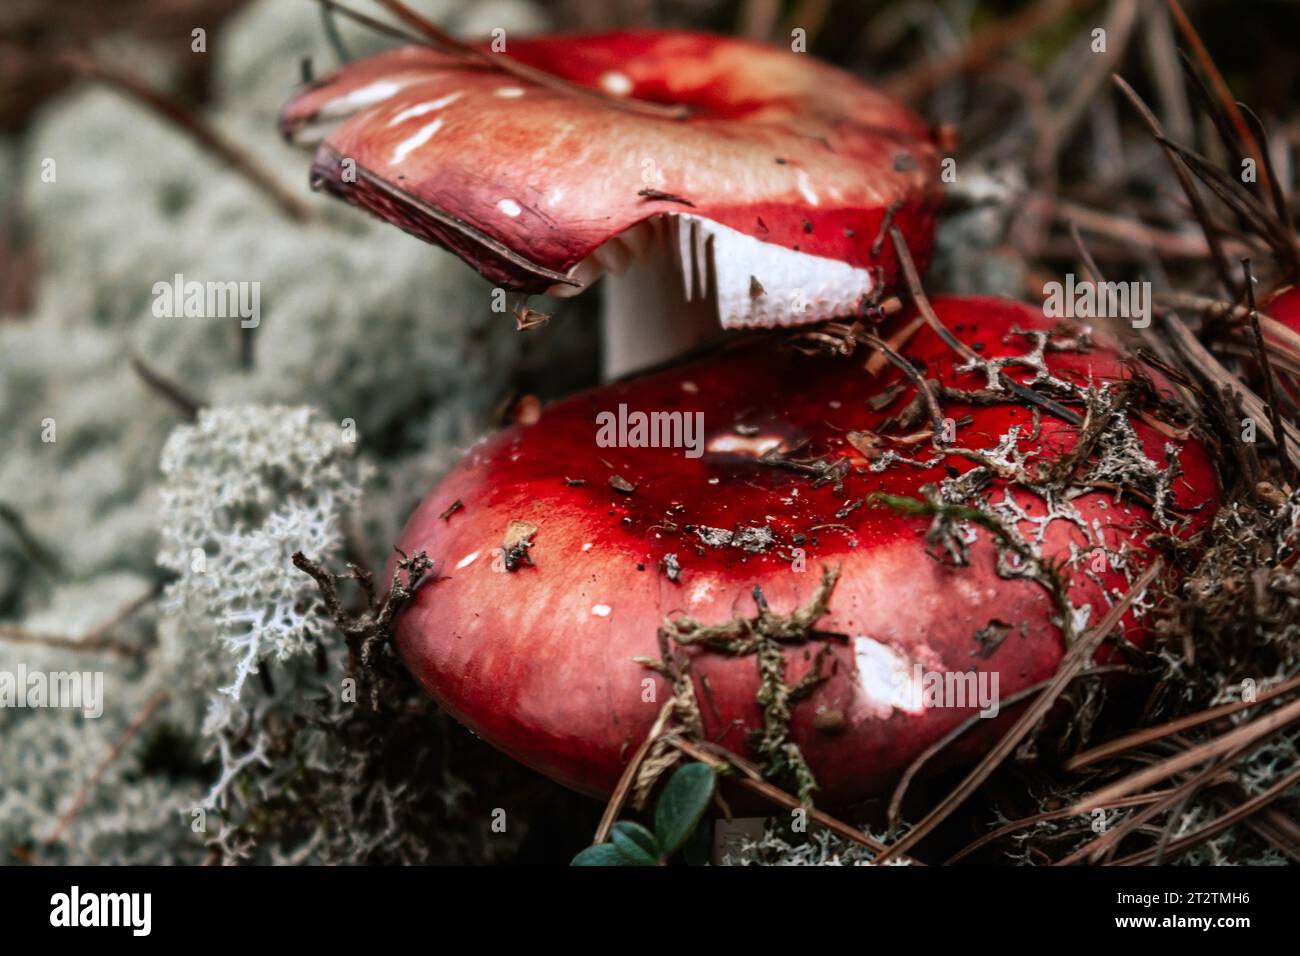 Russula mushroom in autumn forest, surrounded by white moss and dry pine needles. Edible mushrooms with a red cap. Wild harvest season Stock Photo